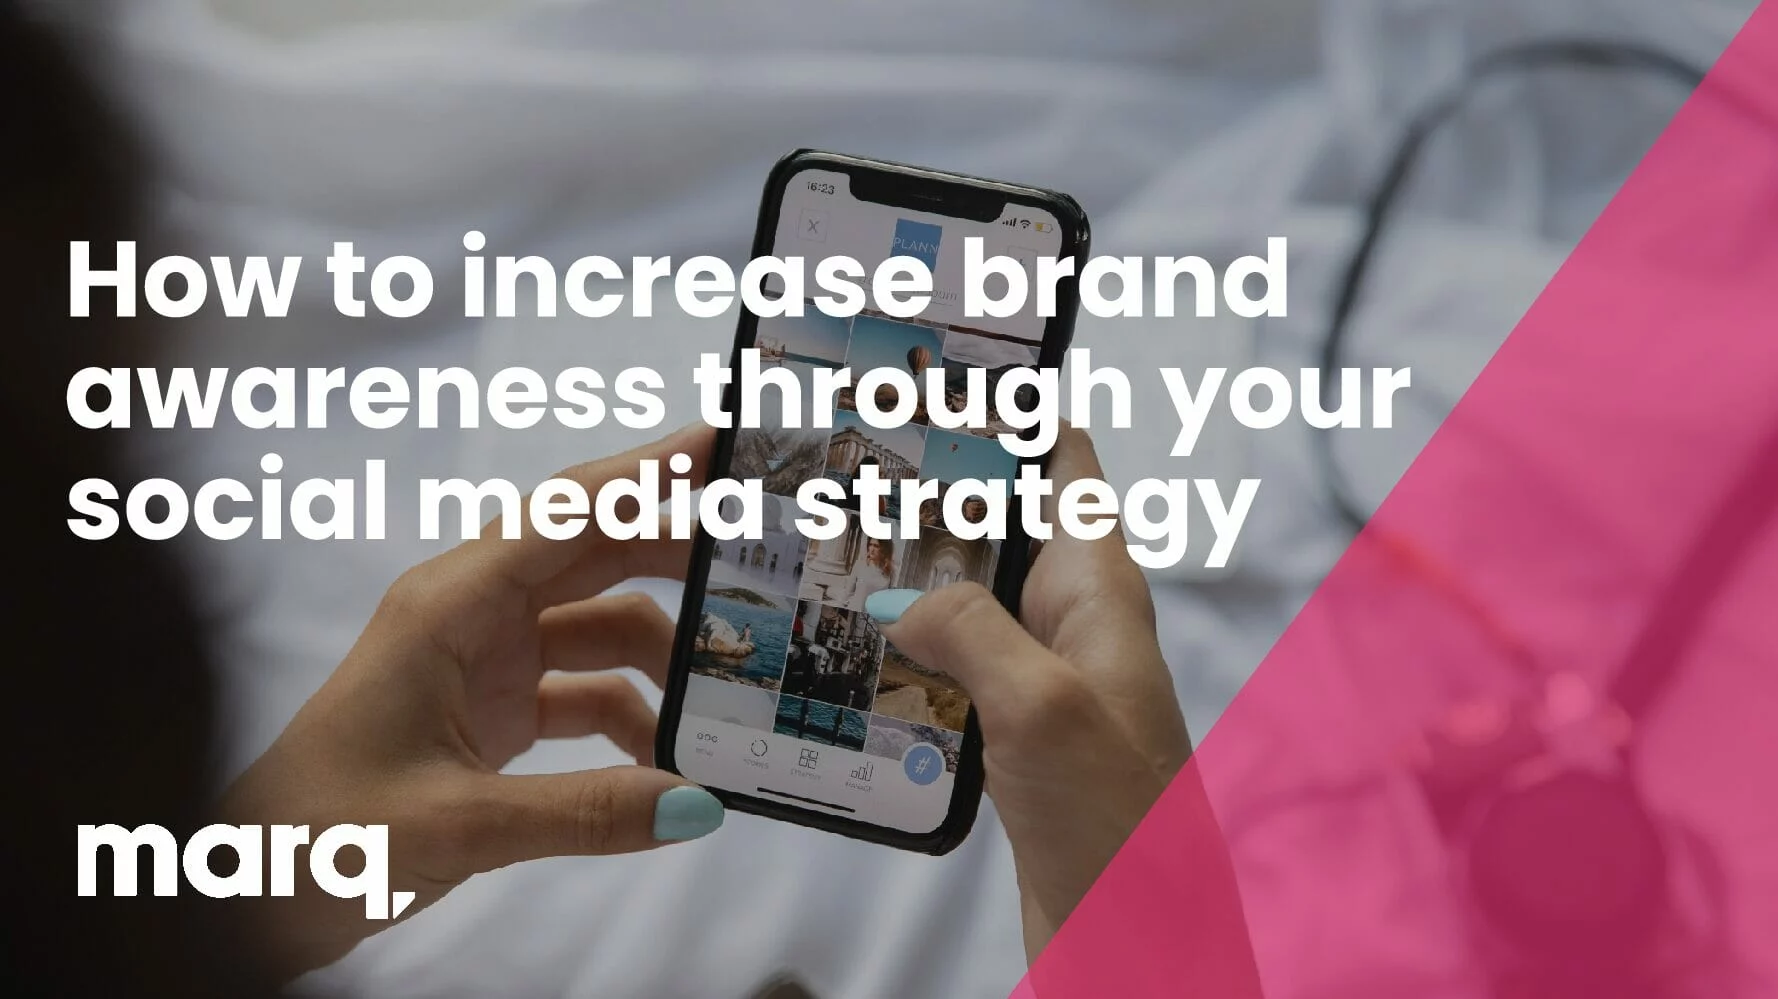 How to increase brand awareness through your social media strategy